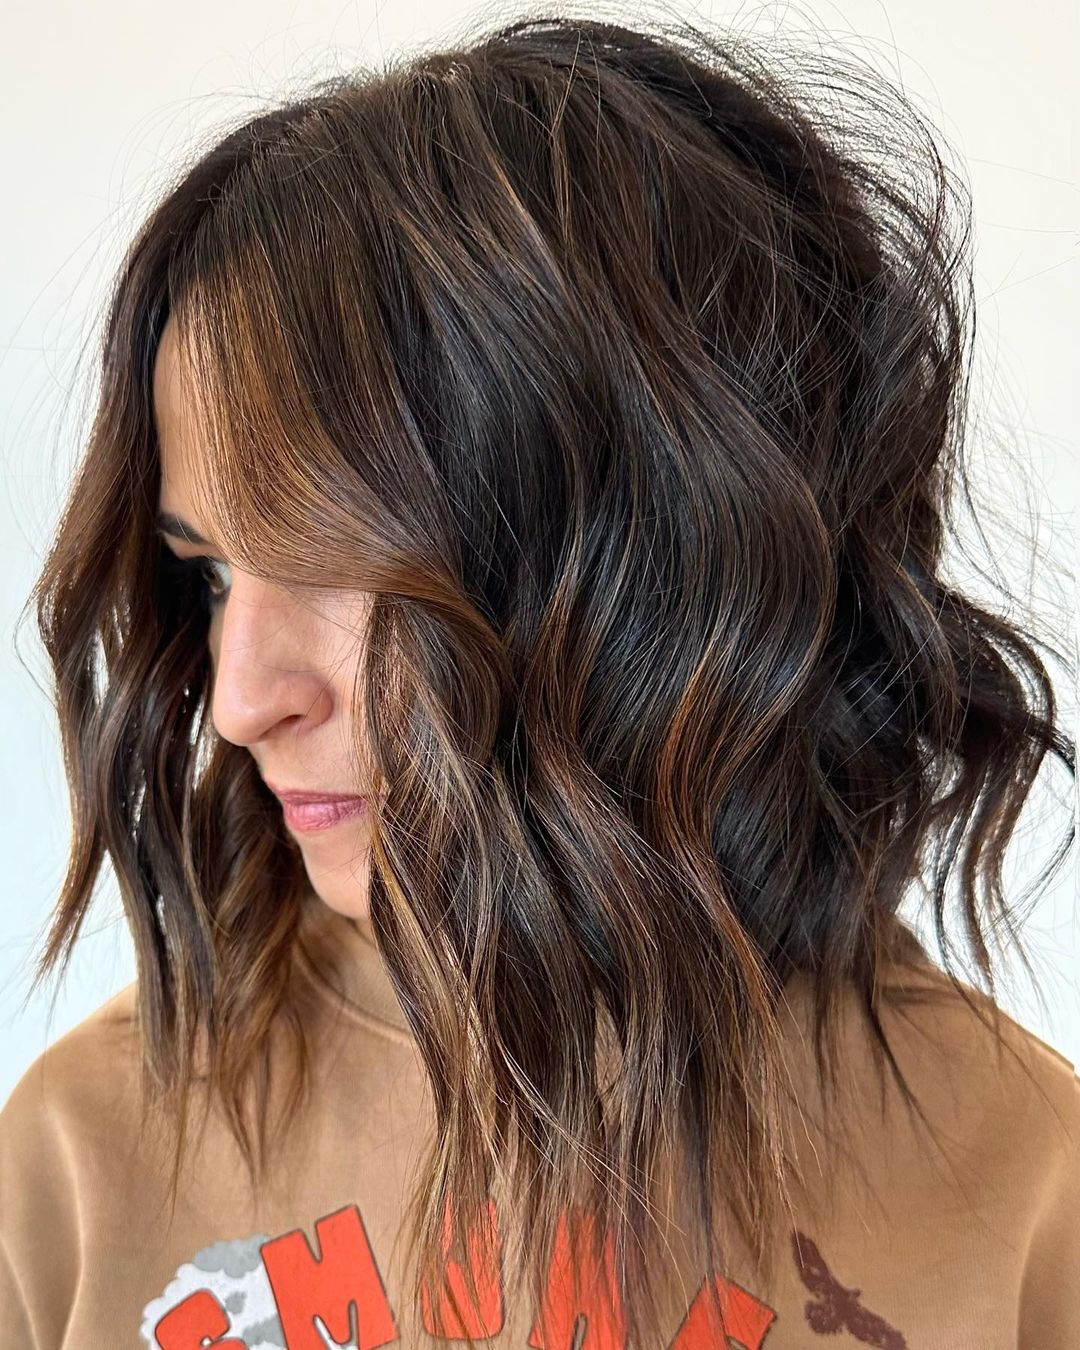 Shoulder-length haircuts for wavy and curly hair: 14 interesting examples